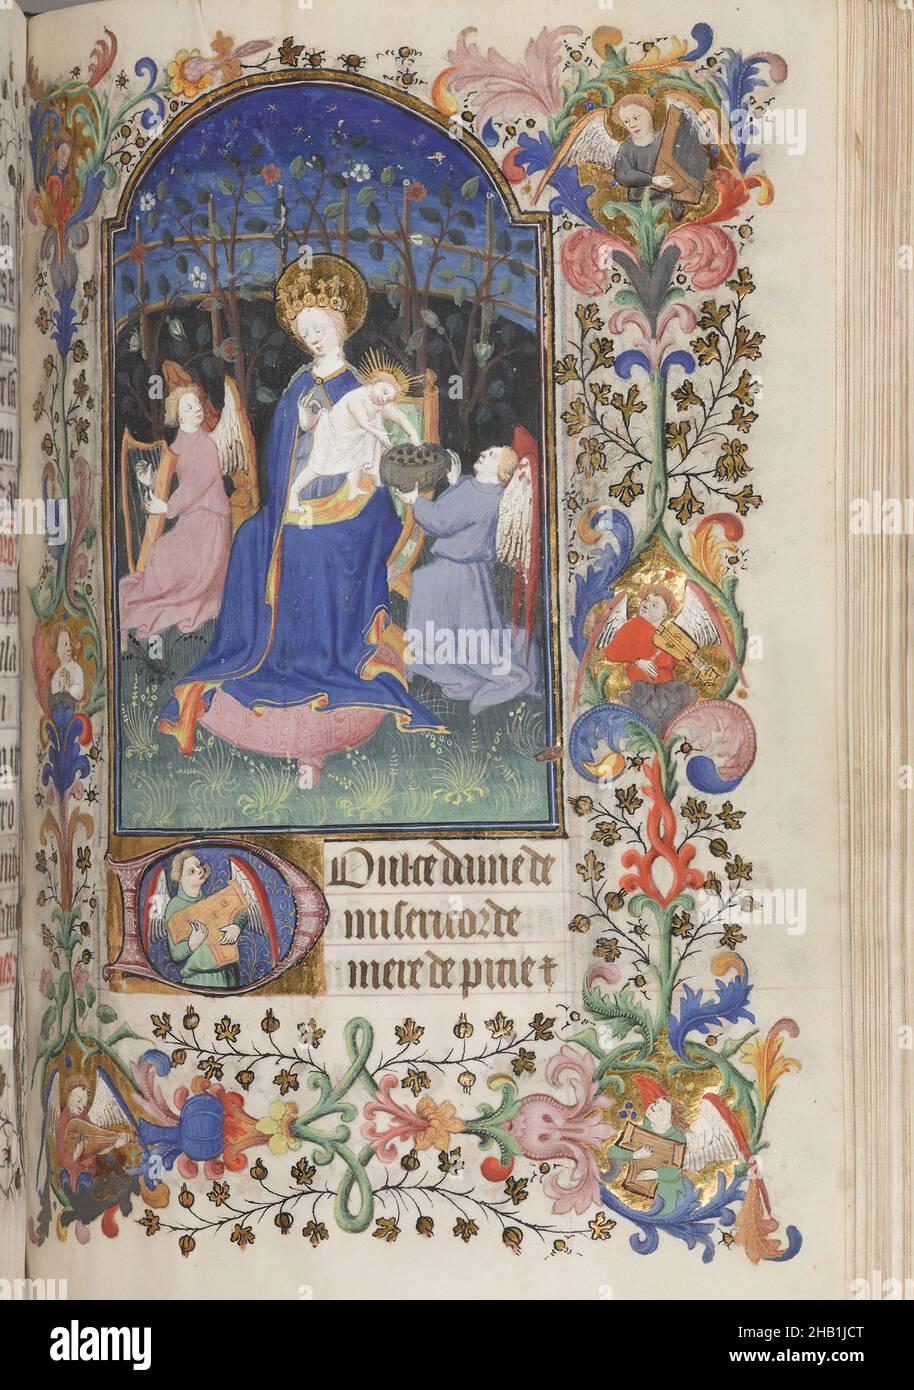 Horae Beatae Mariae Virginis, Manuscript in opaque watercolor and ink with gold, ca. 1425-1460, book: 8 × 5 3/4 × 2 3/8 in., 20.3 × 14.6 cm, Book of Hours, calligraphy, Catholic, Christian, Gothic, holy, illumination, Latin, manuscript, medieval, Religion, script, scripture, Virgin Mary Stock Photo